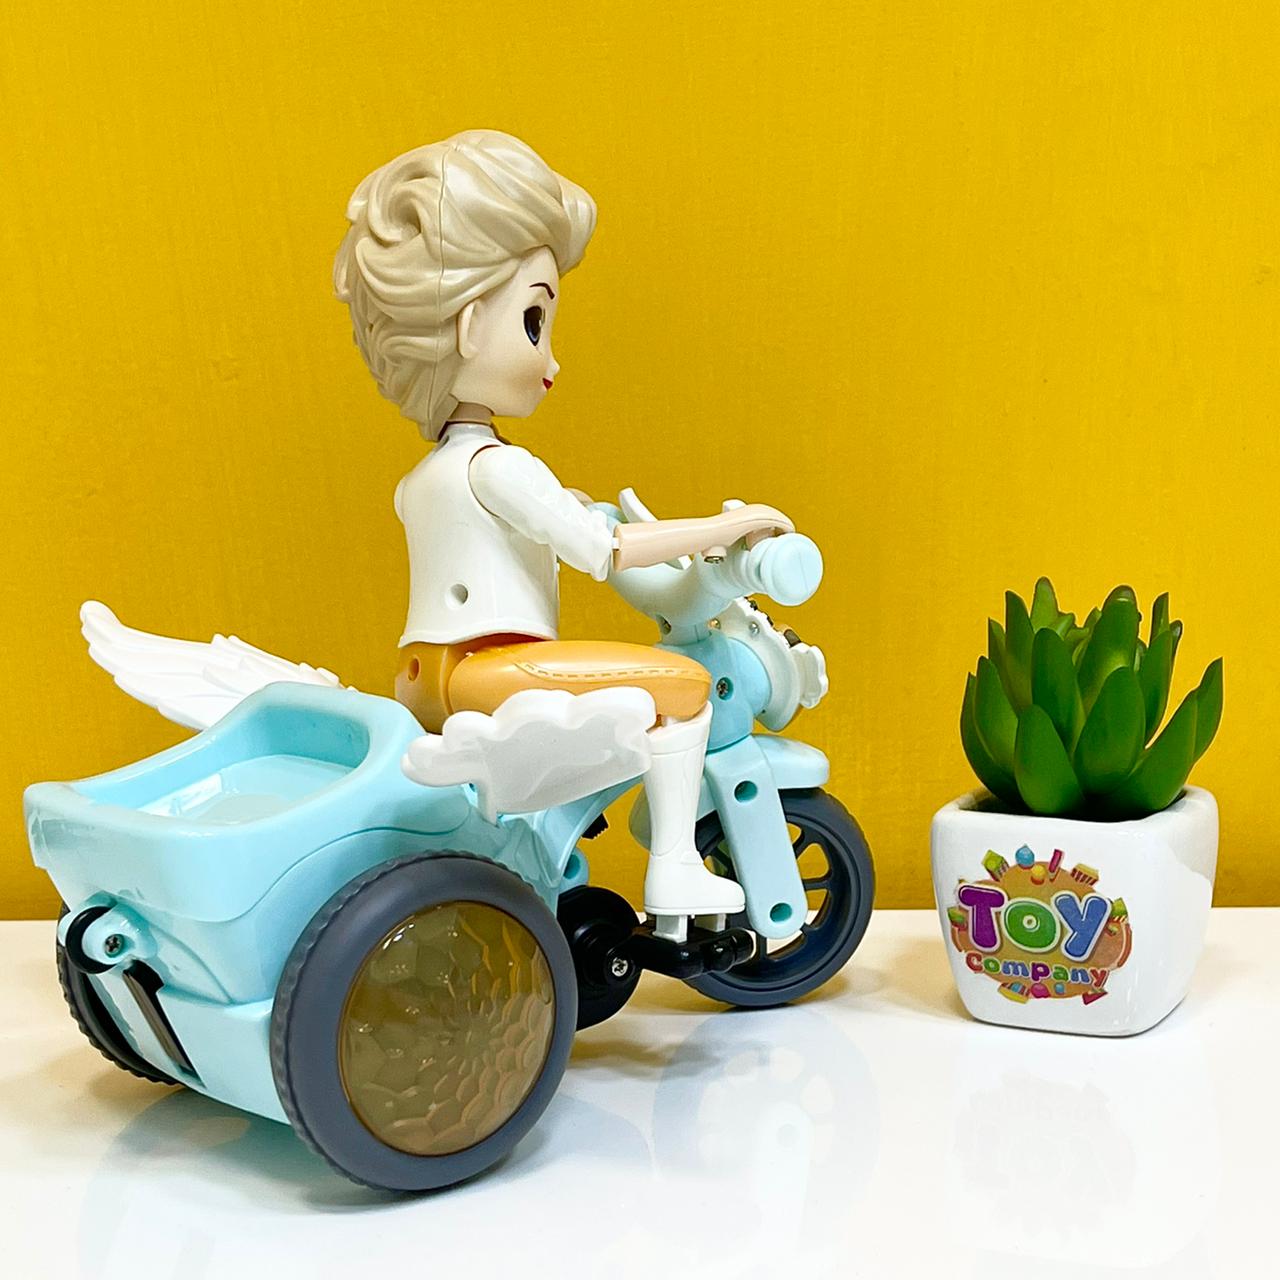 Musical Girl Bicycle Toy